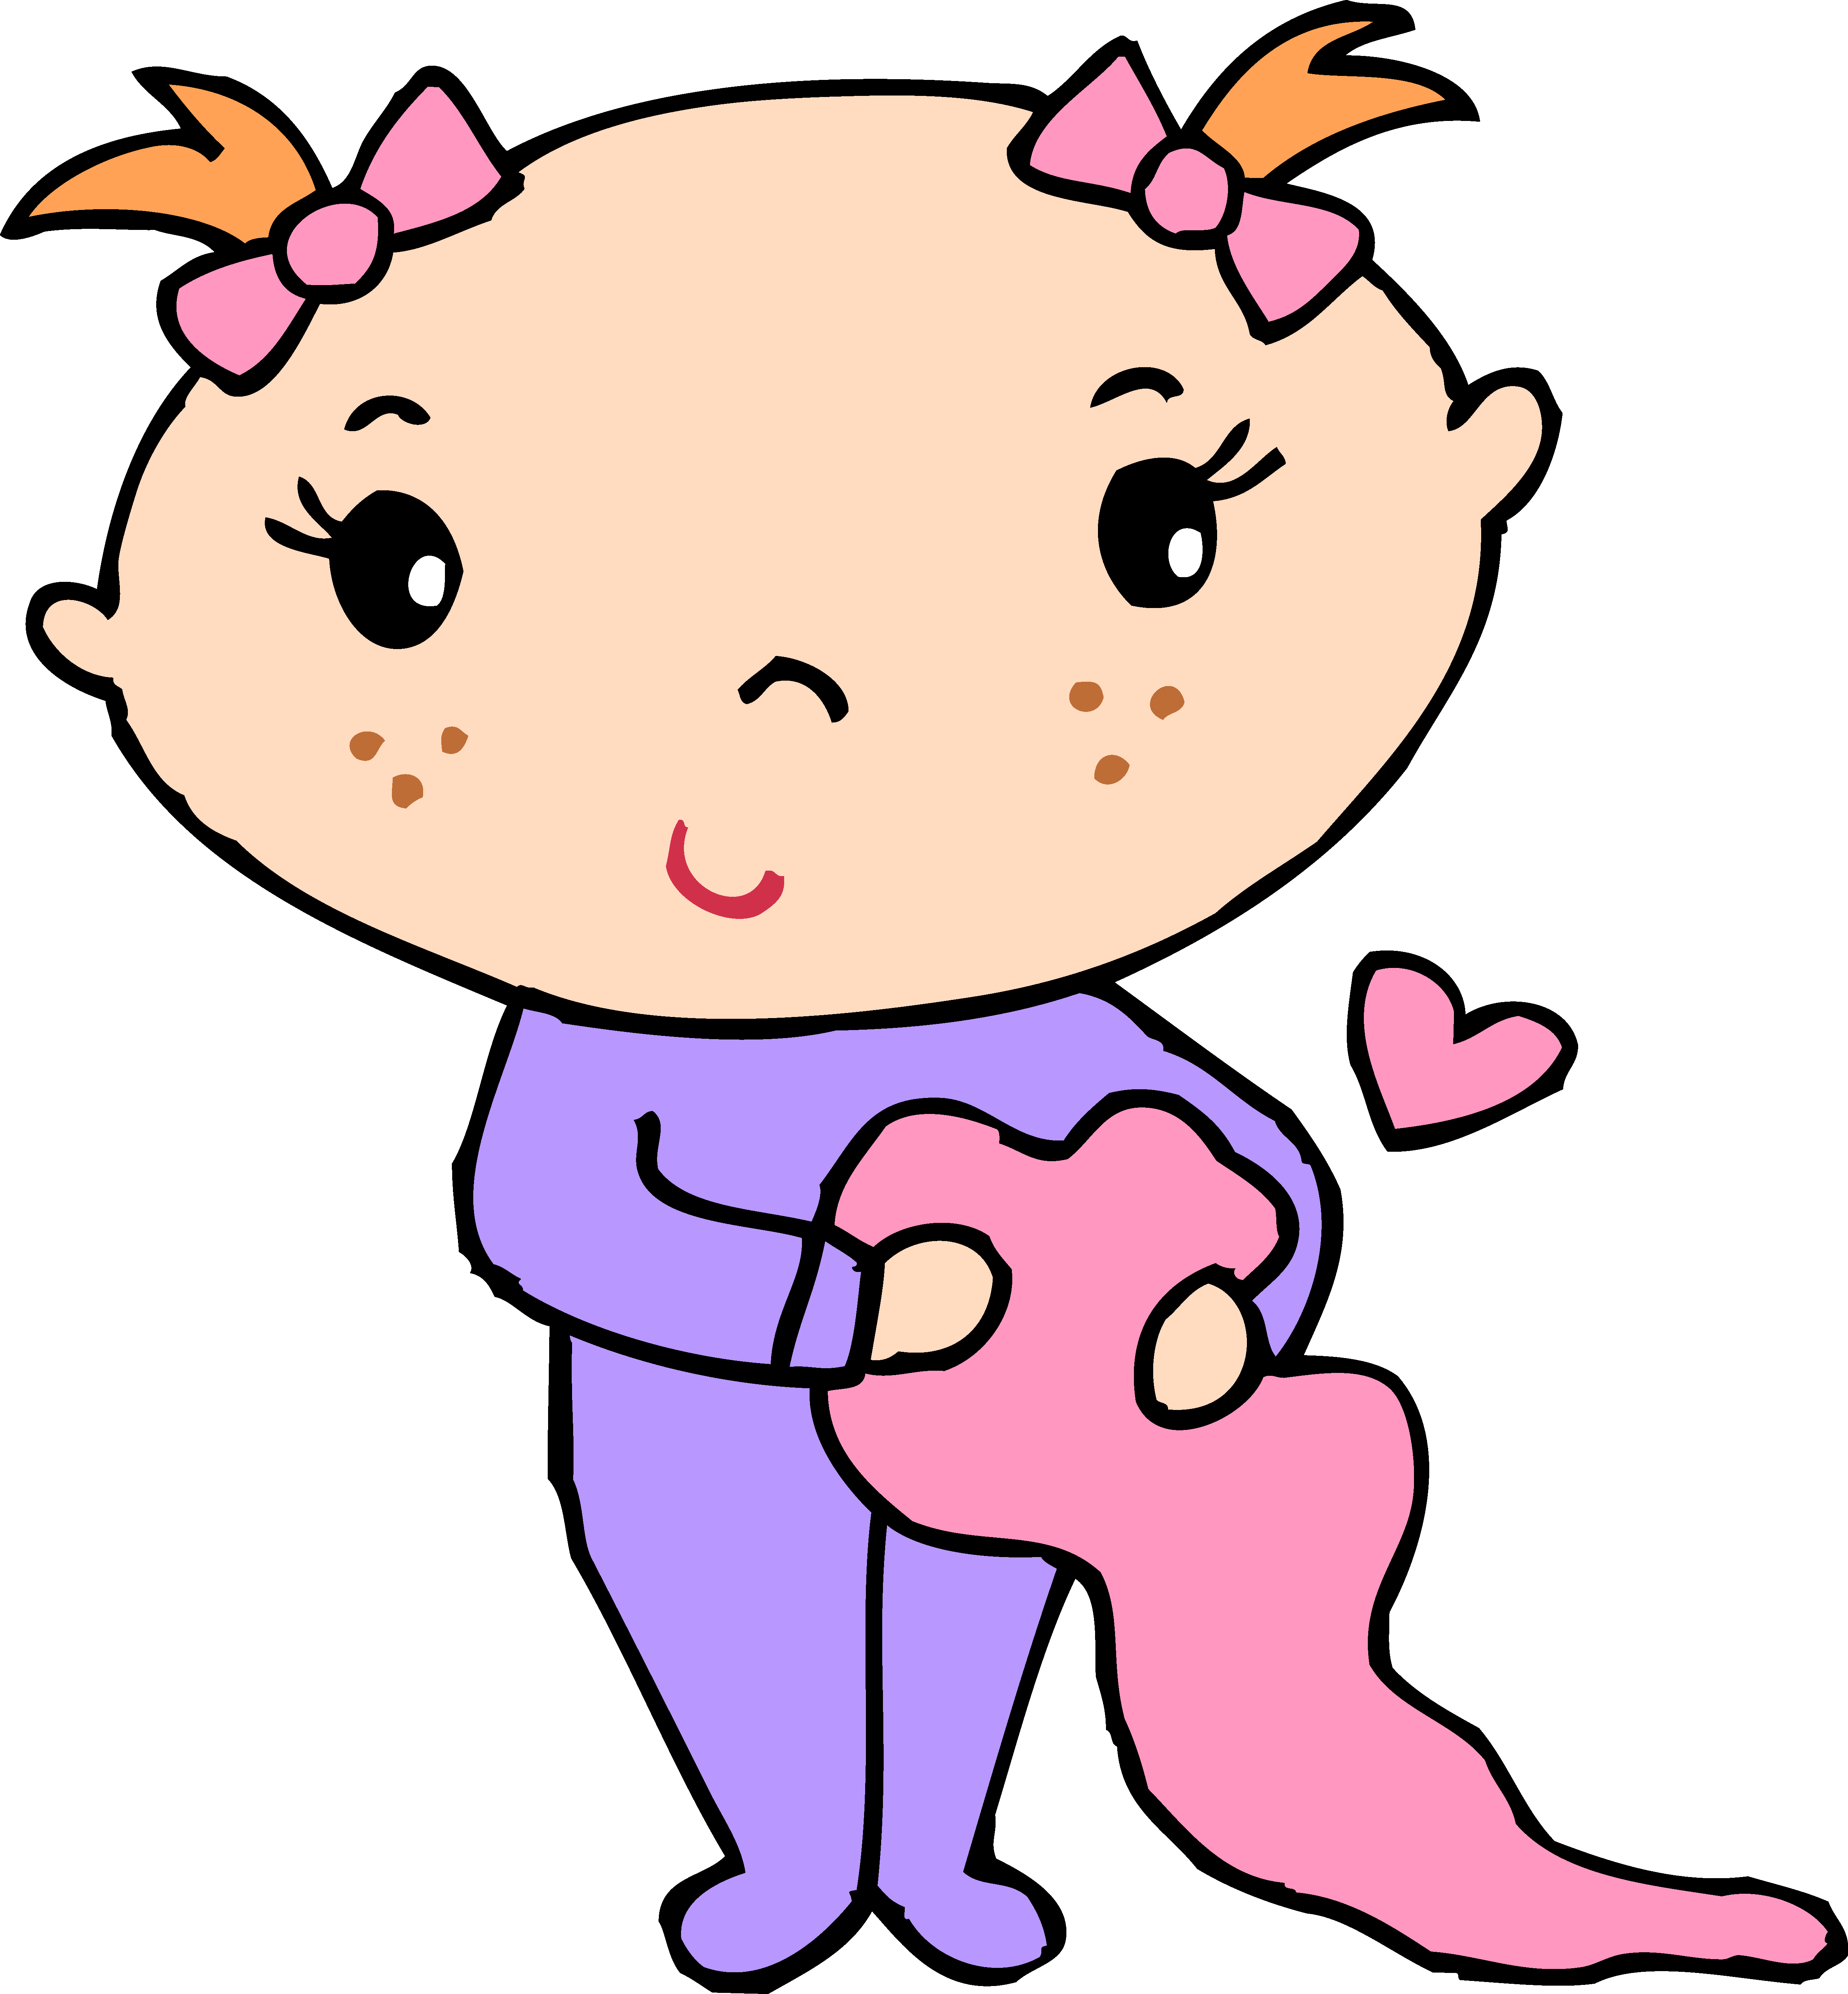 free baby clipart to download - photo #12